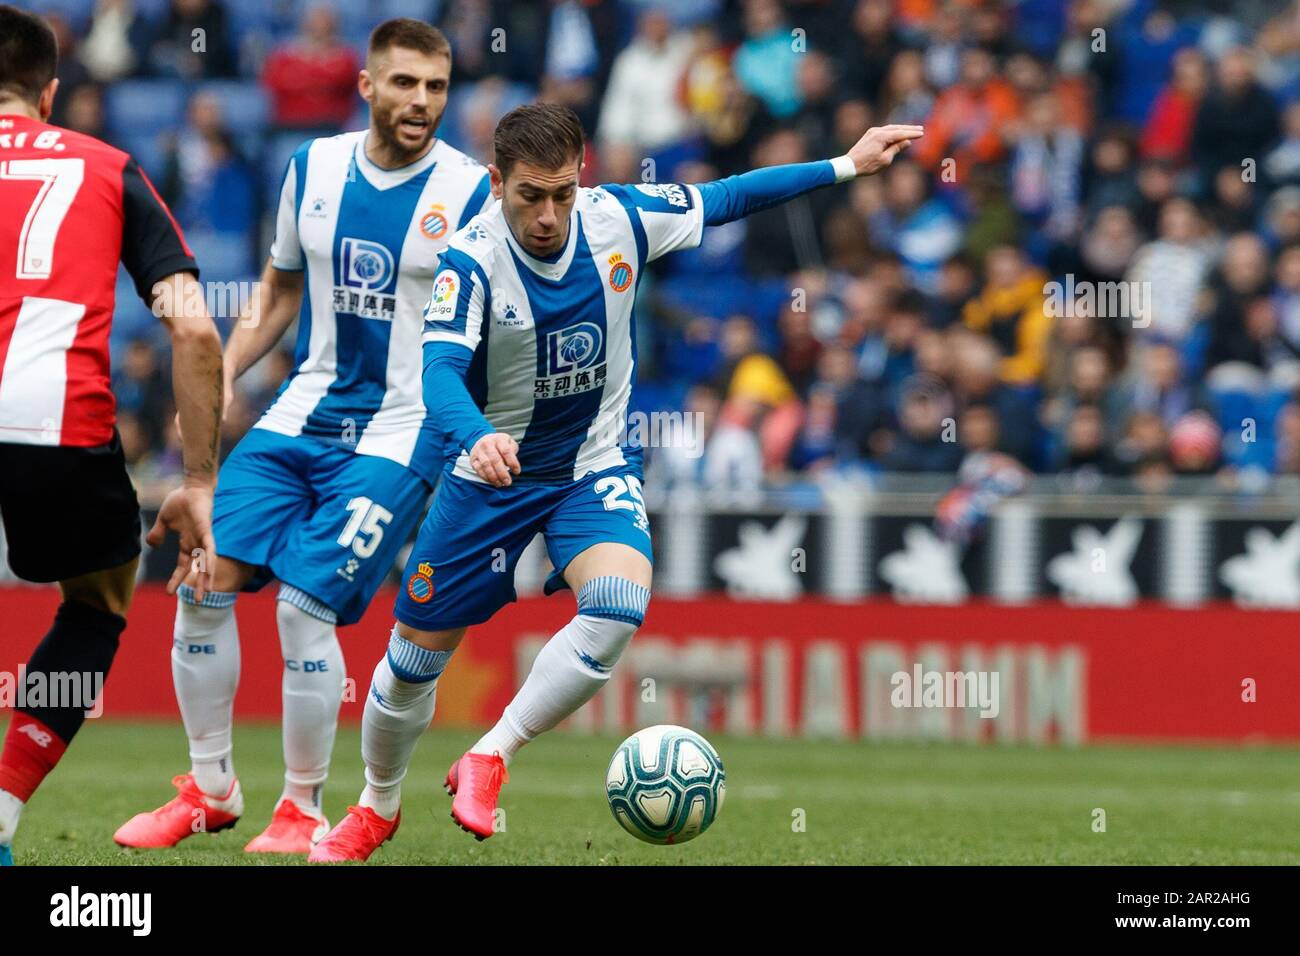 BARCELONA, SPAIN - JANUARY 24:.Adrian Embarba of RCD Espanyol during the Liga match between RCD Espanyol and FC Barcelona at RCD Stadium on January 24, 2020 in Barcelona, Spain. (Photo by DAX/ESPA-Images) Stock Photo